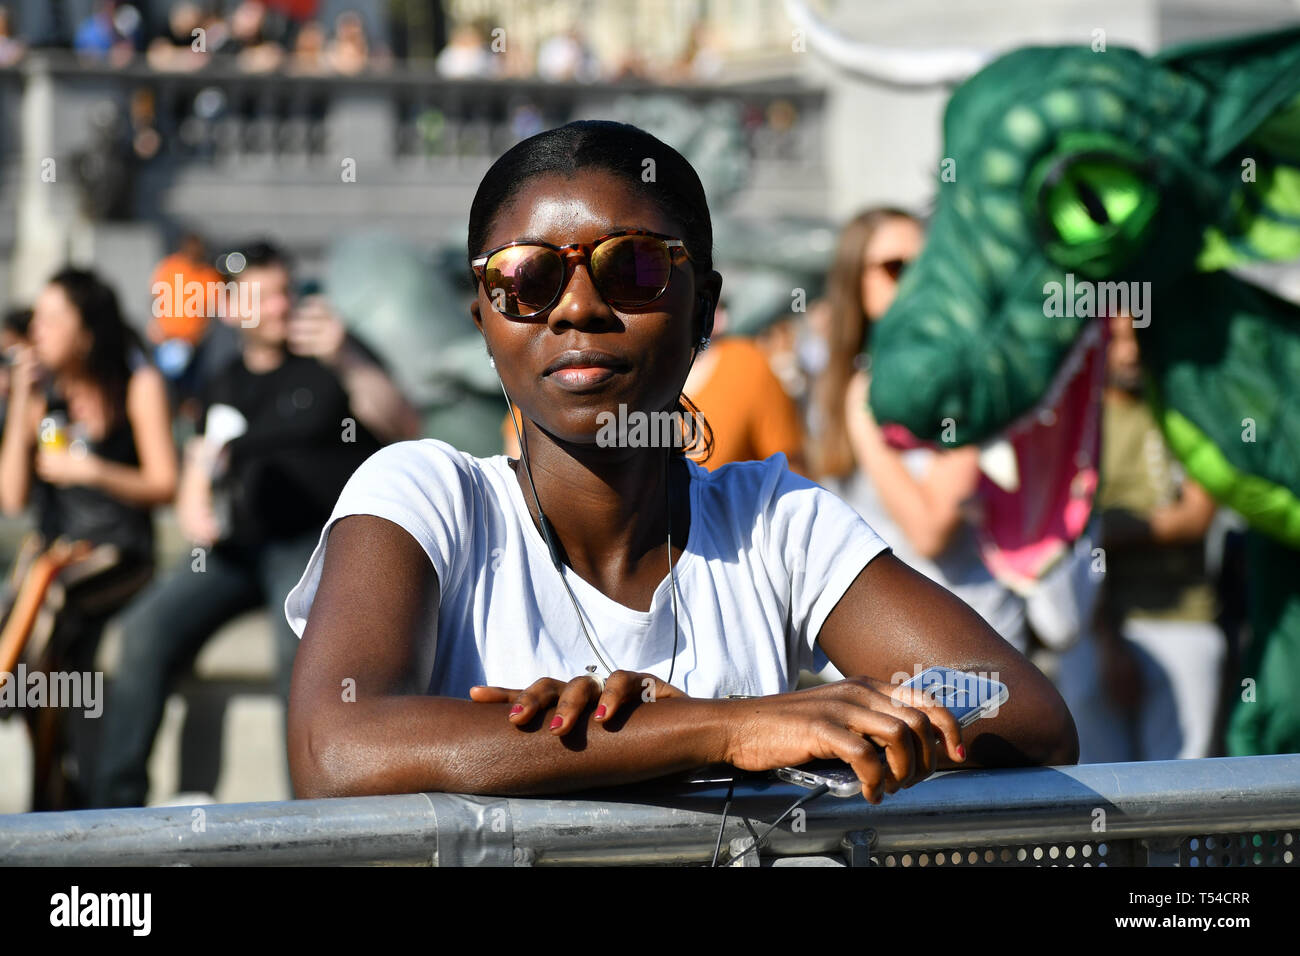 London, UK. 20th April, 2019.London, UK. 20th April, 2019. Feast of St George to celebrate English culture with music and English food stalls in Trafalgar Square on 20 April 2019, London, UK. Credit: Picture Capital/Alamy Live News Credit: Picture Capital/Alamy Live News Credit: Picture Capital/Alamy Live News Stock Photo